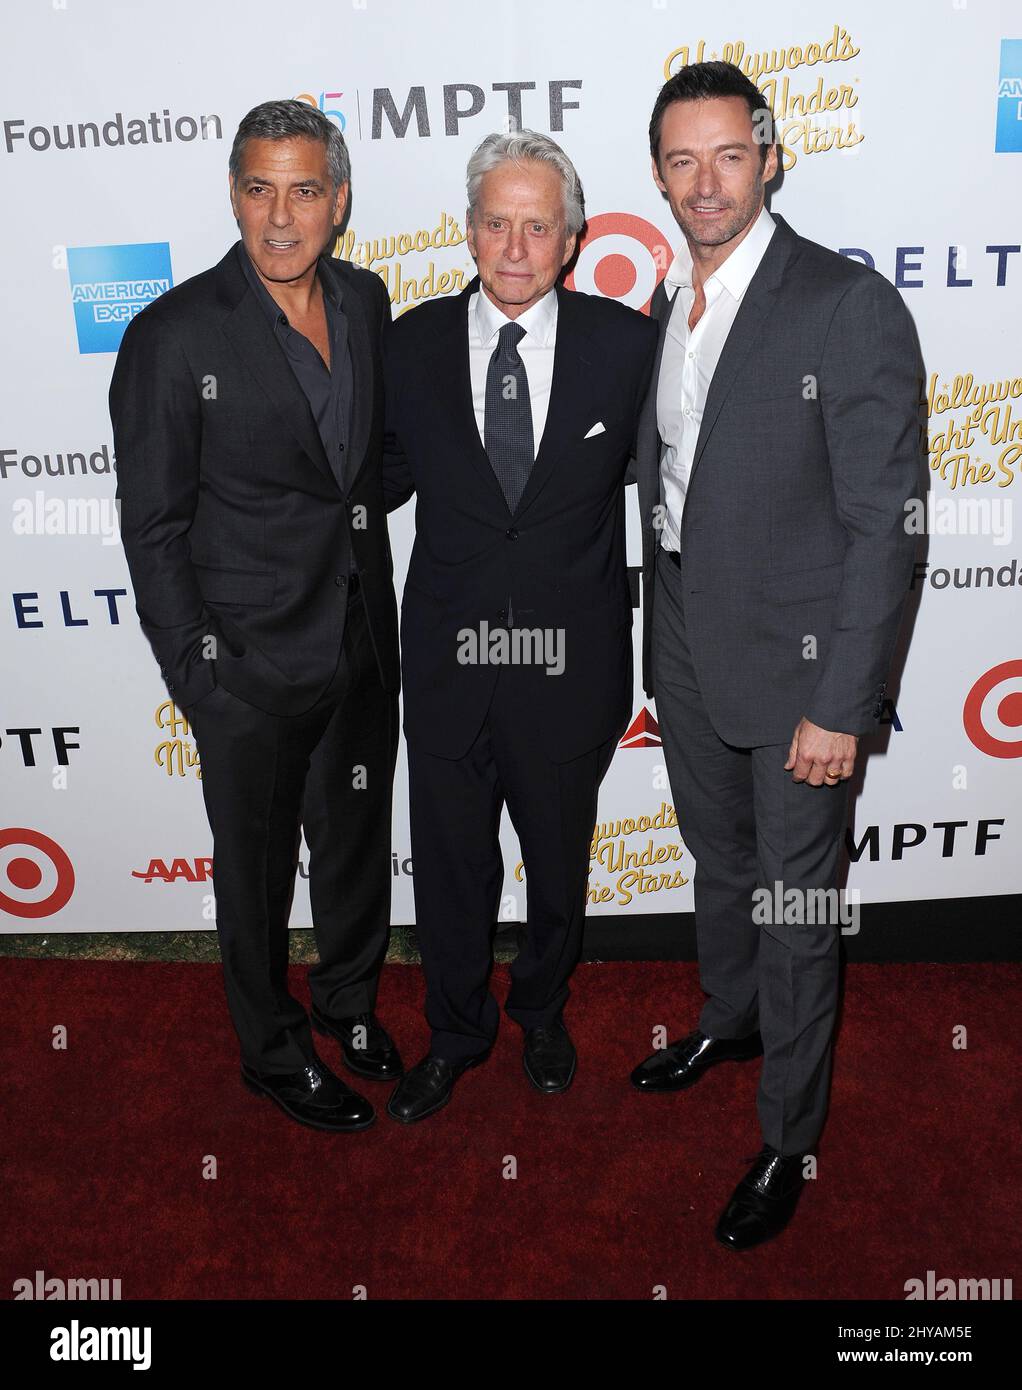 George Clooney, Michael Douglas, Hugh Jackman attending the 'Hollywood's Night Under The Stars' 95th Anniversary Celebration held at MPTF Wasserman Campus in Los Angeles, USA. Stock Photo